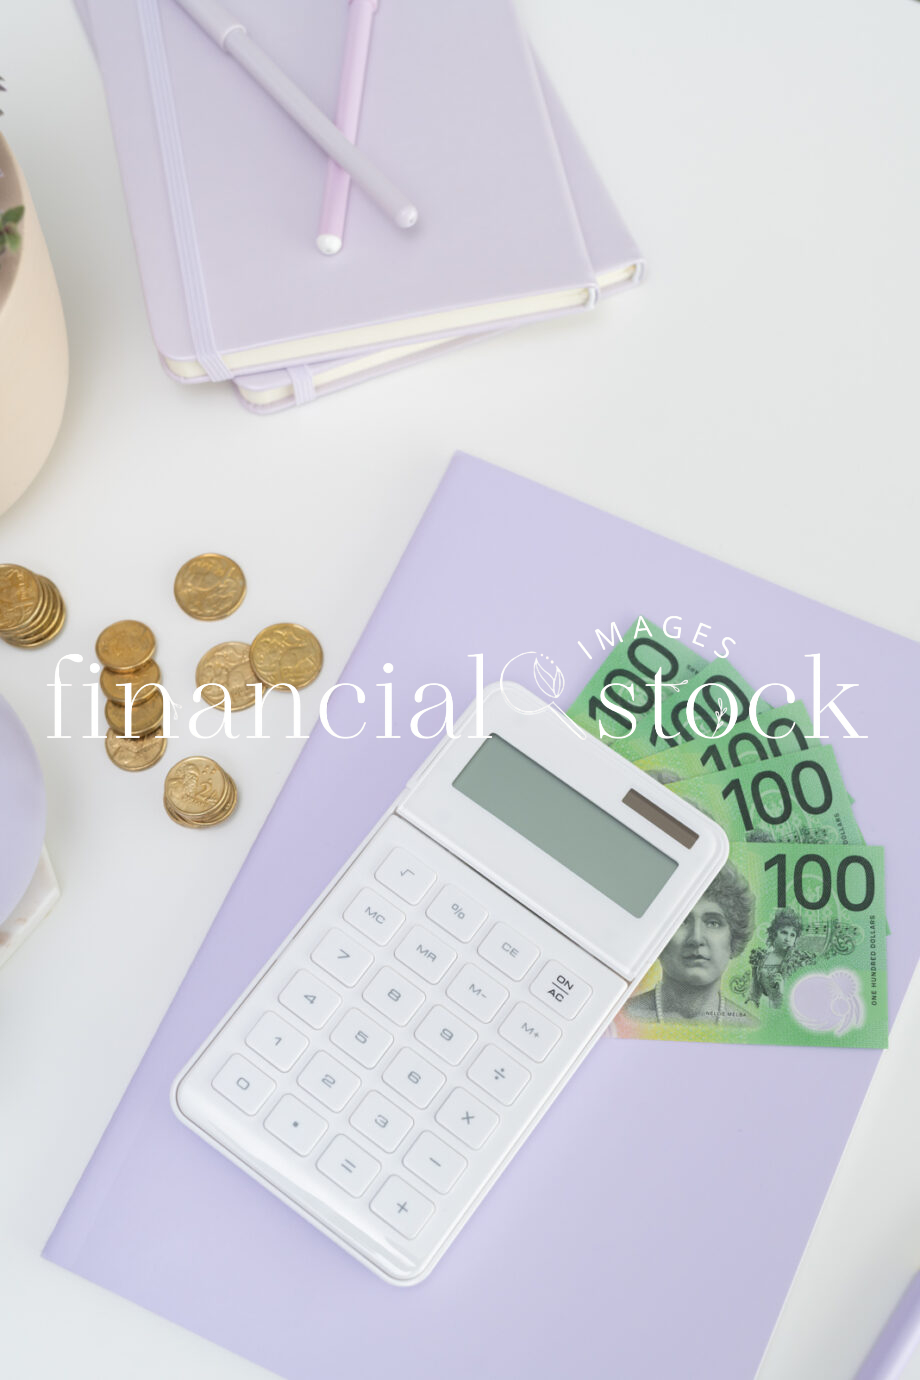 Financial, Stock, Images, Lilac, Office, Images, Women, Money, Australian, Finance, Bookkeeper, Services, Business